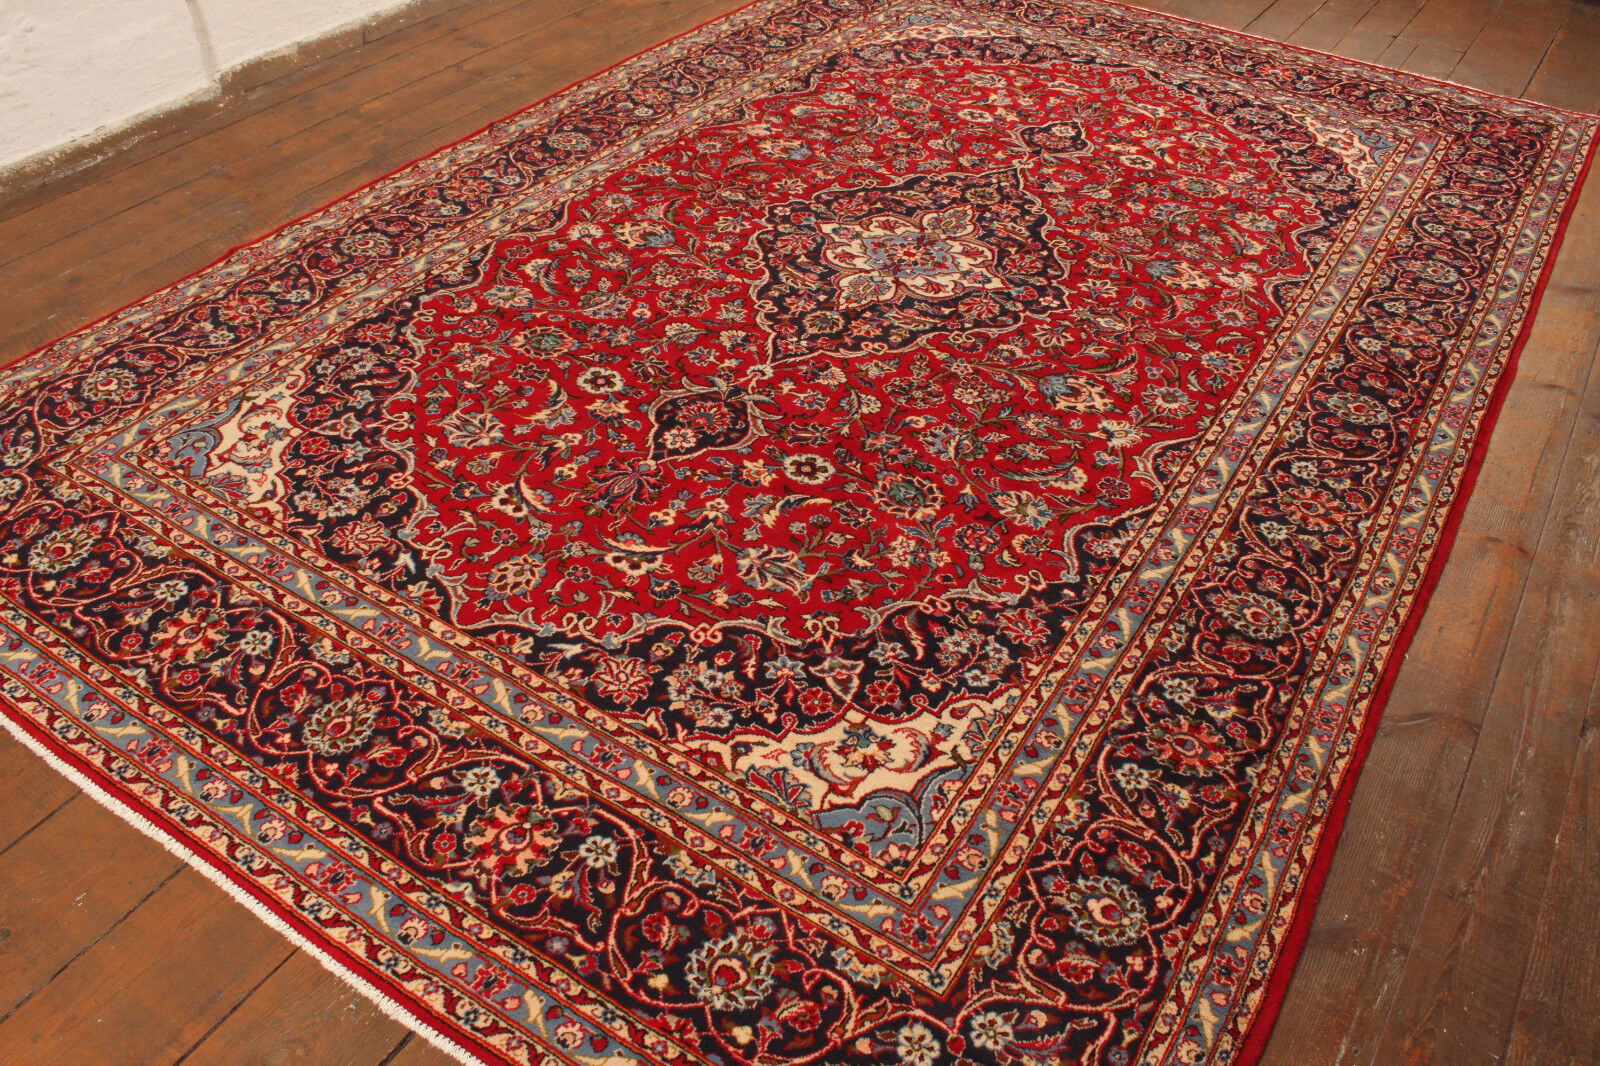 Overhead shot of the Handmade Vintage Persian Style Kashan Rug displaying size and dimensions